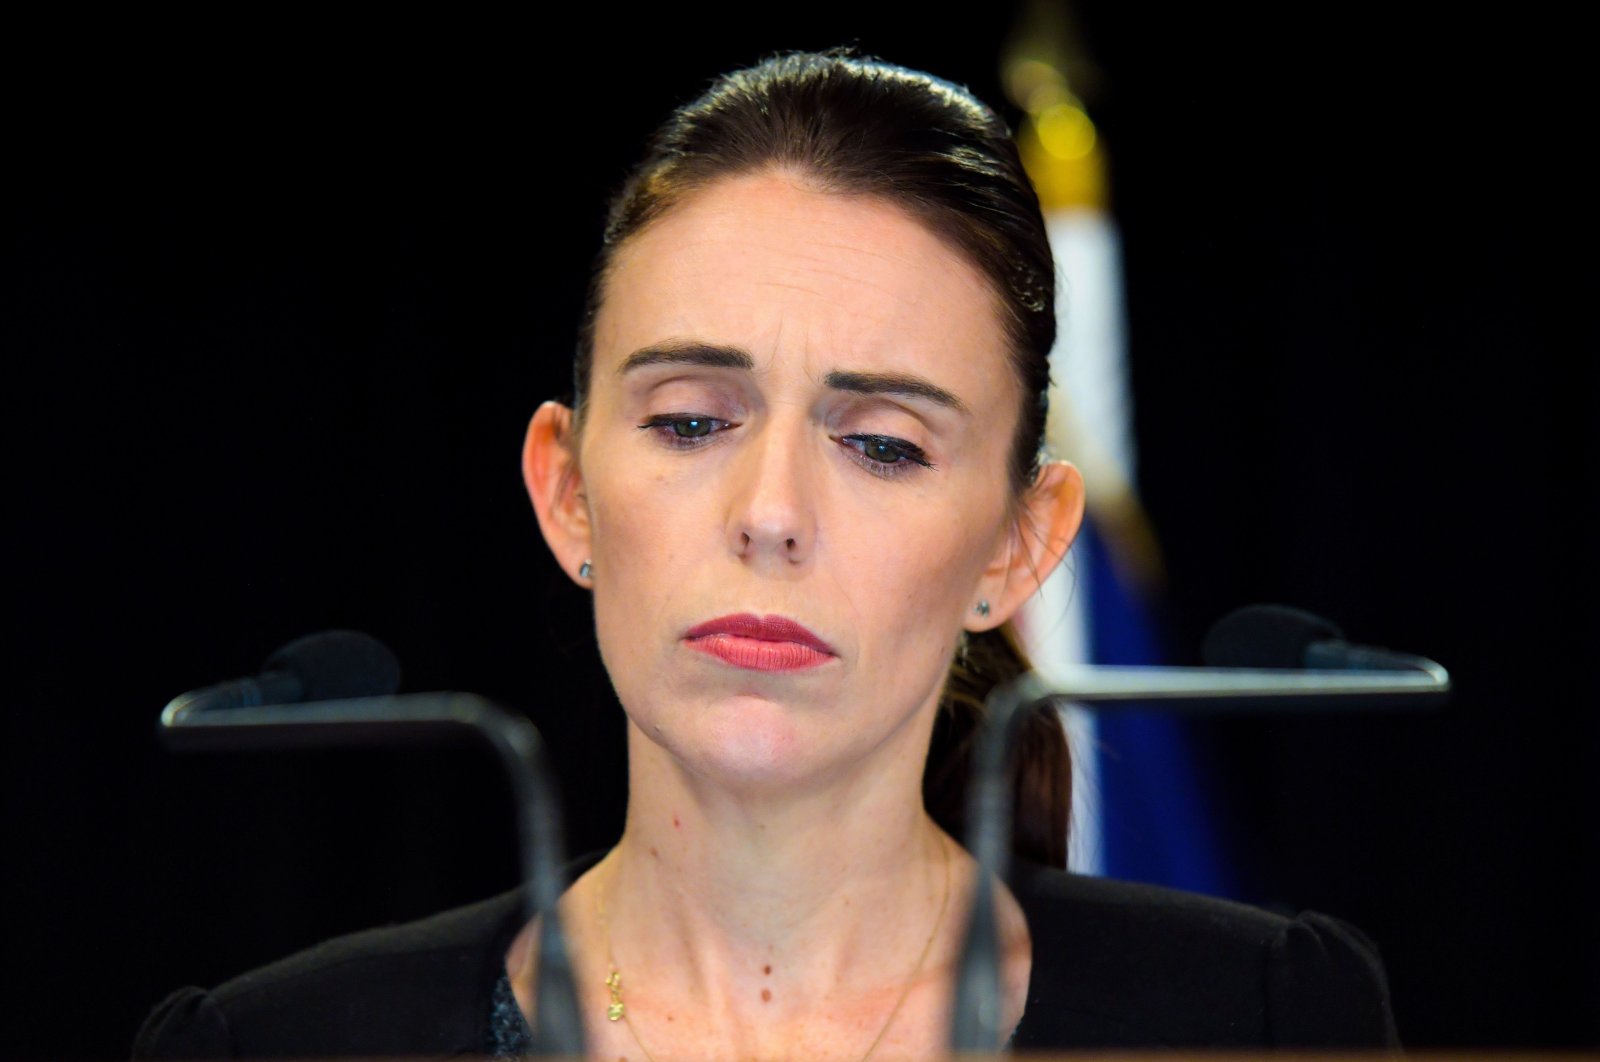 New Zealand Prime Minister Jacinda Ardern attends a media during a post Cabinet media press conference at Parliament in Wellington, New Zealand, on March 18, 2019. (AFP Photo)